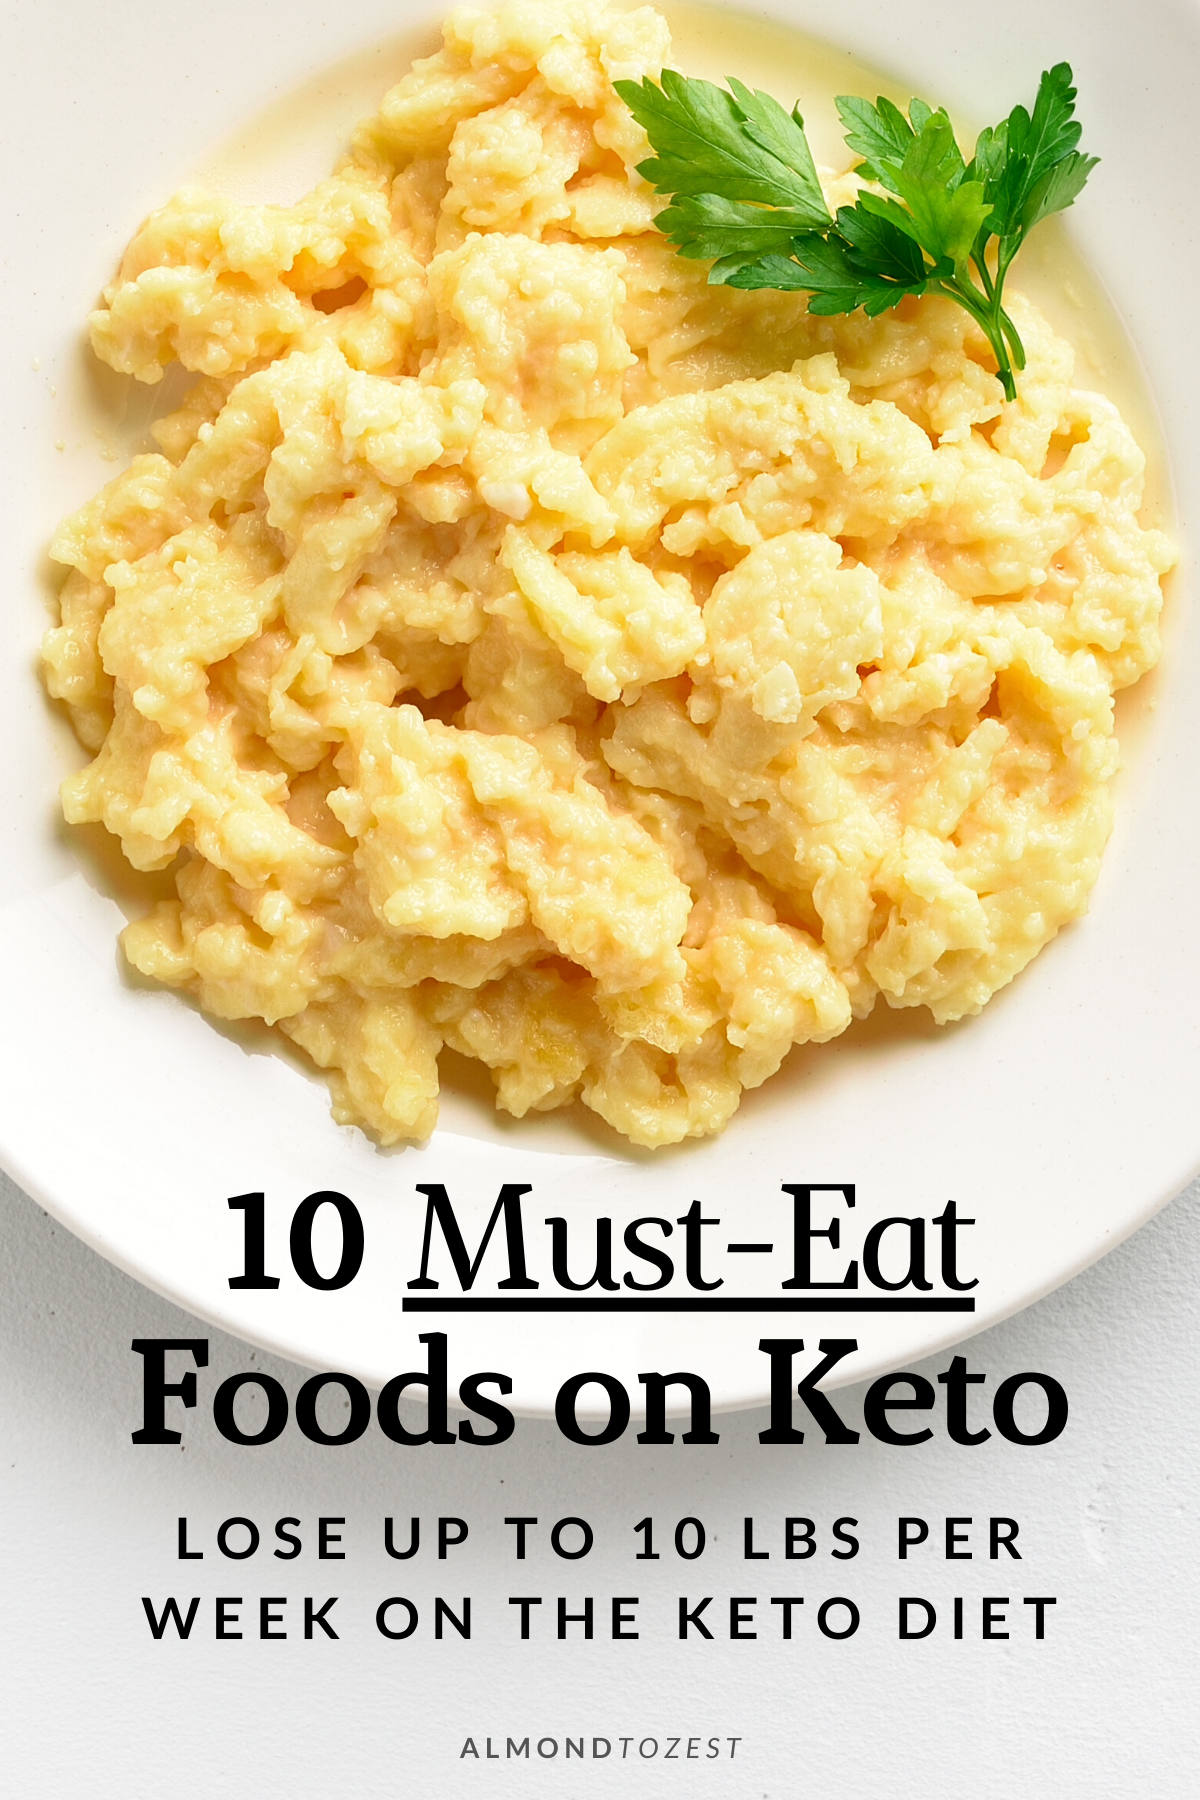 The 9 best keto diet foods that are delicious, low-carb keto foods that to help you stay in ketosis. You no longer have to worry about finding a keto diet food list for your keto meal plan.